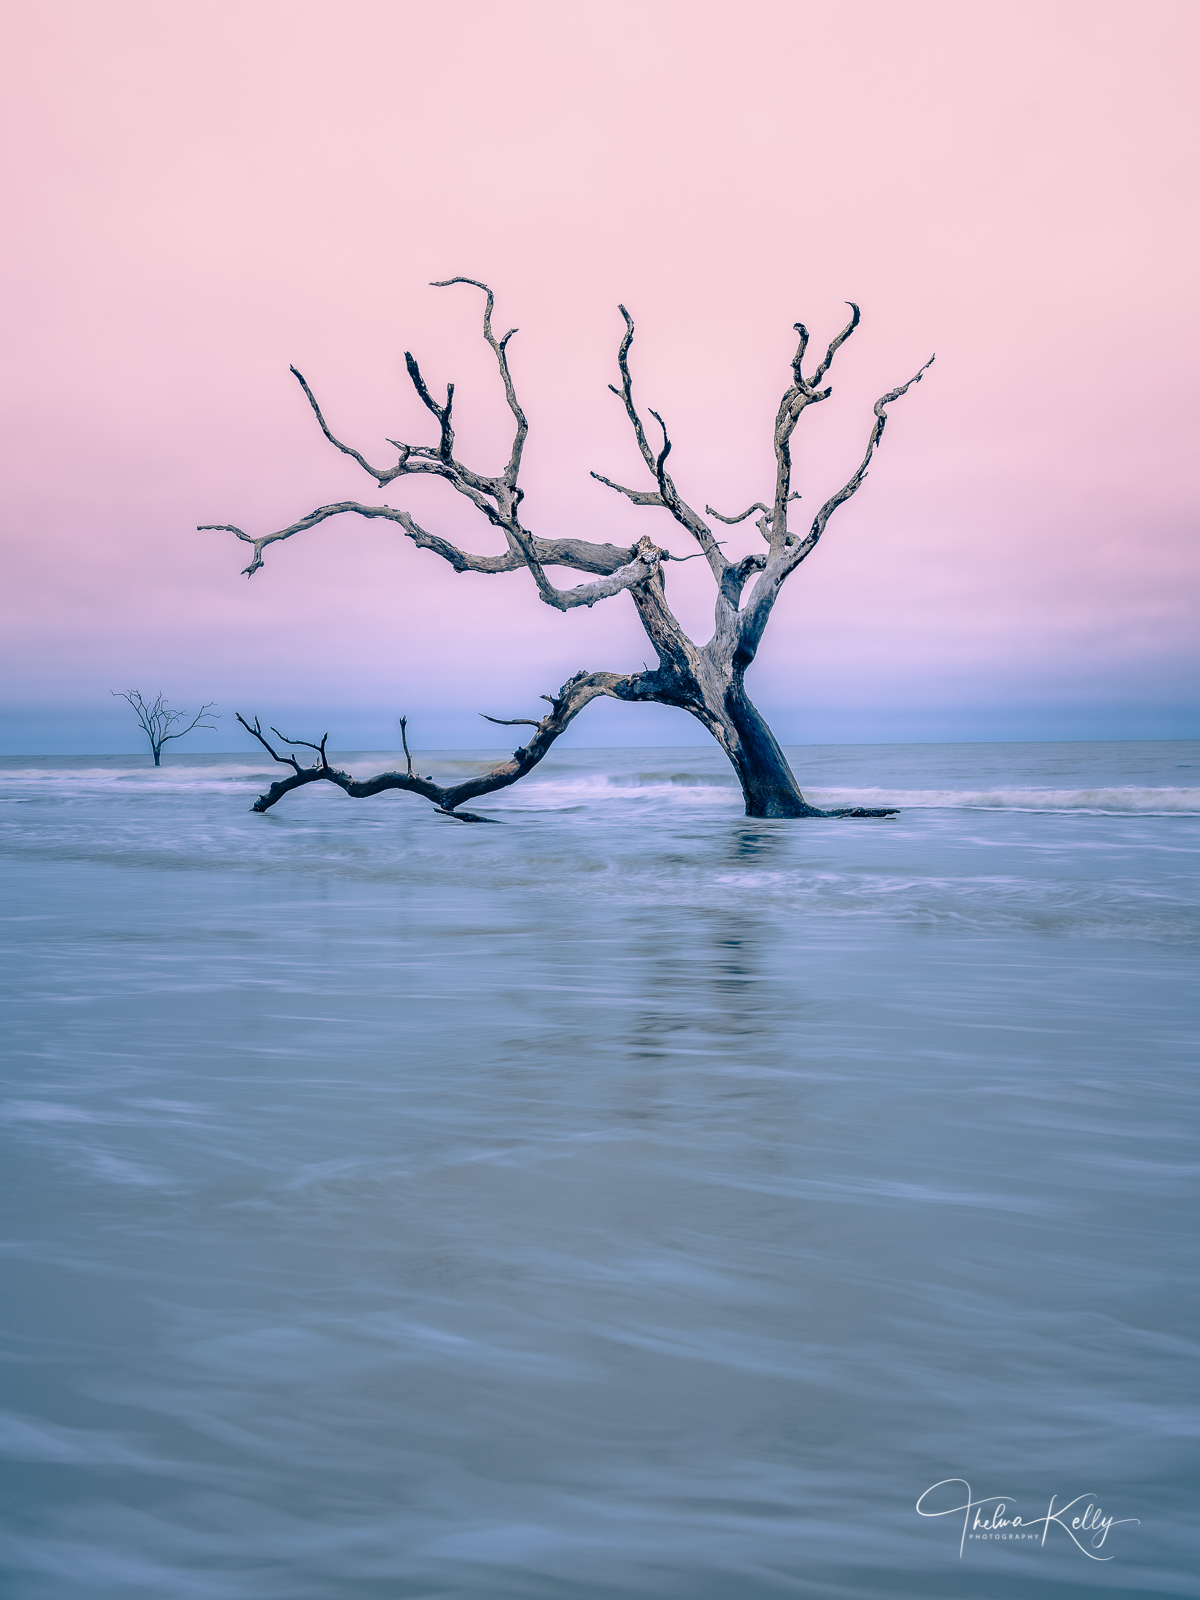 Bulls Island of the coast of South Carolina is a barrier island with many species of dead trees